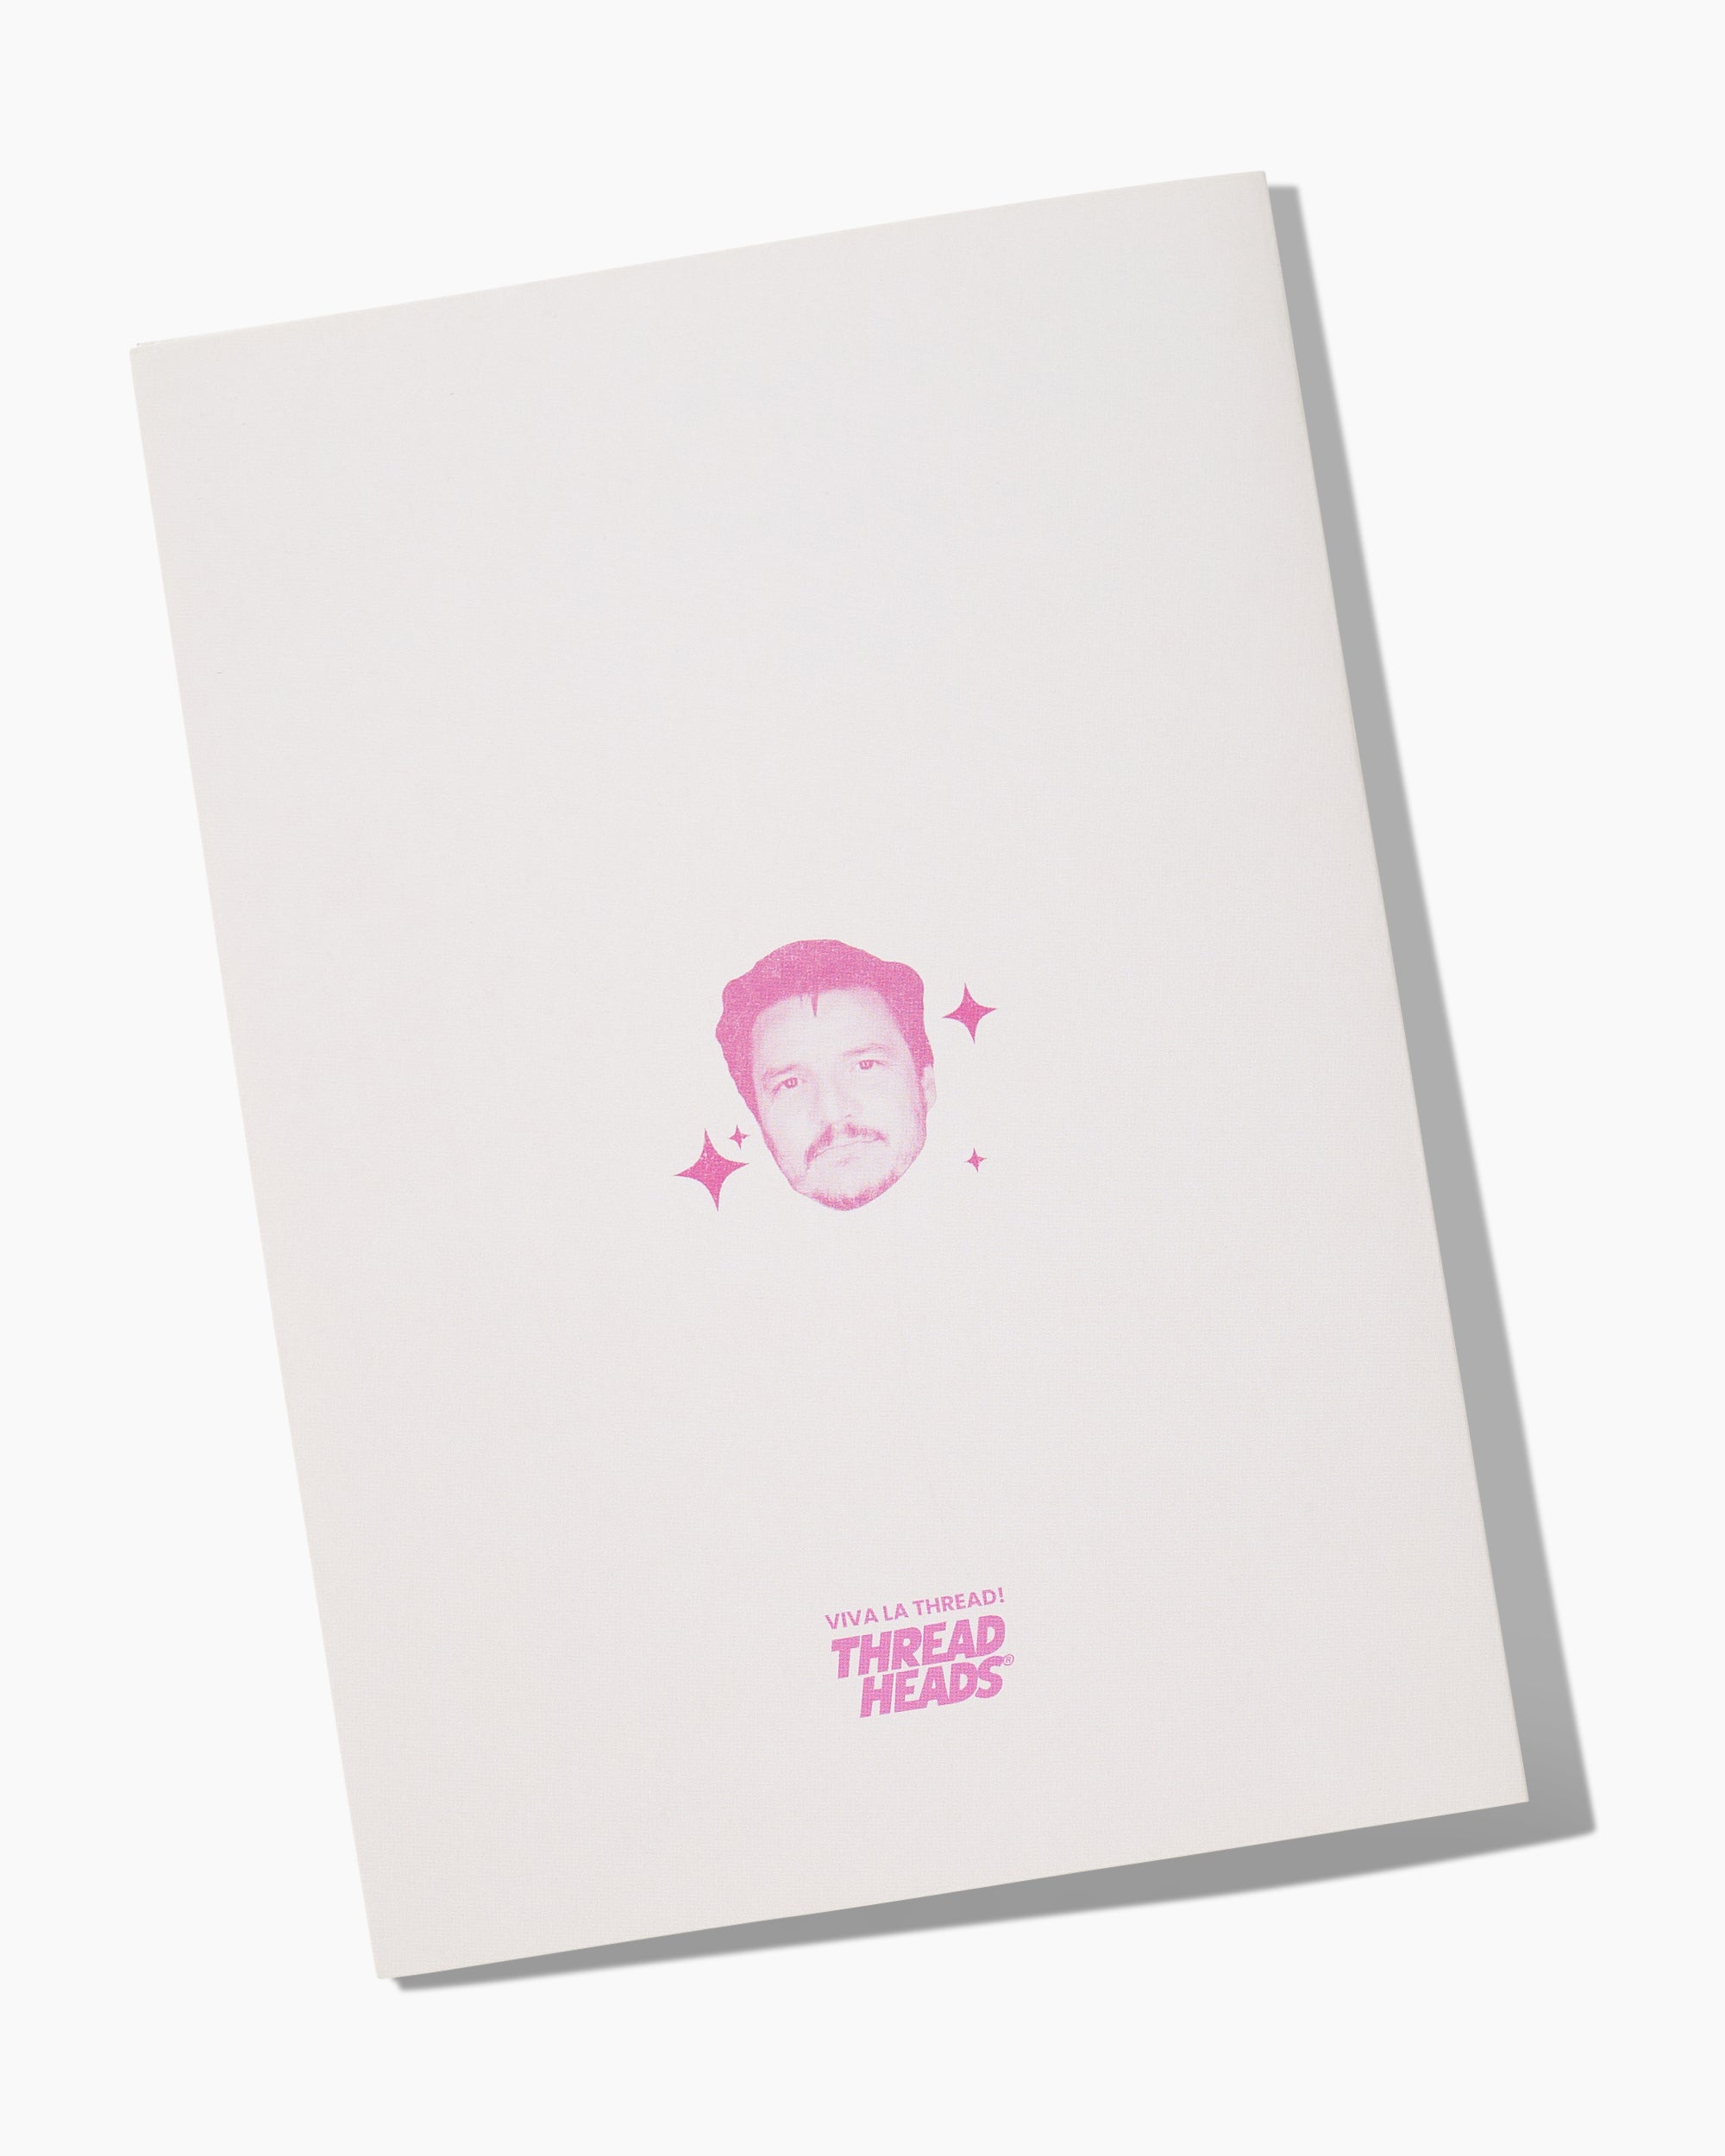 Daddy is a State of Mind Greeting Card Australia Online